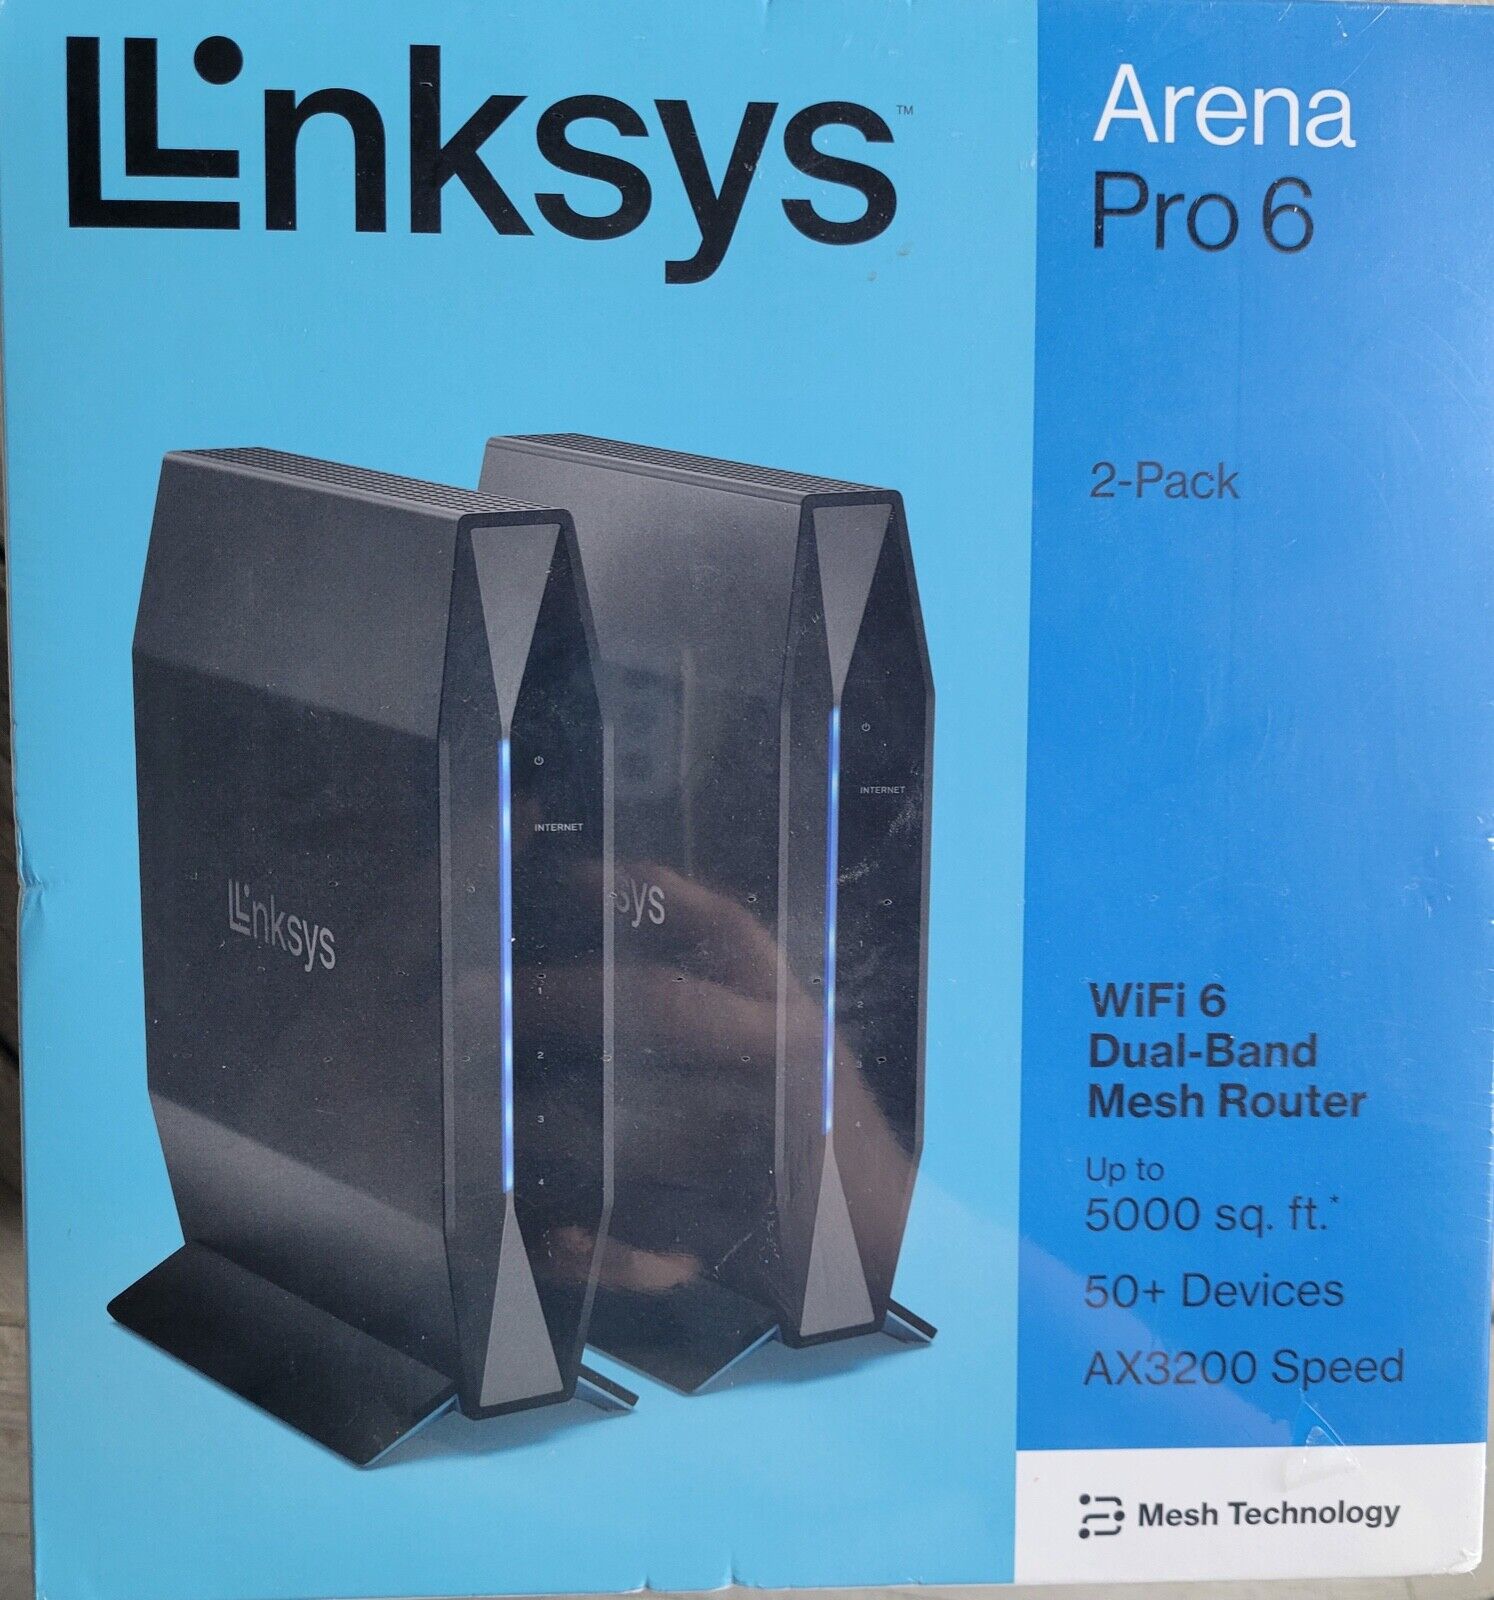 NEW Linksys Arena Pro 6 Whole Home Mesh System Wi-Fi 6 AX3200 2-Pack 5,000 Sq Ft